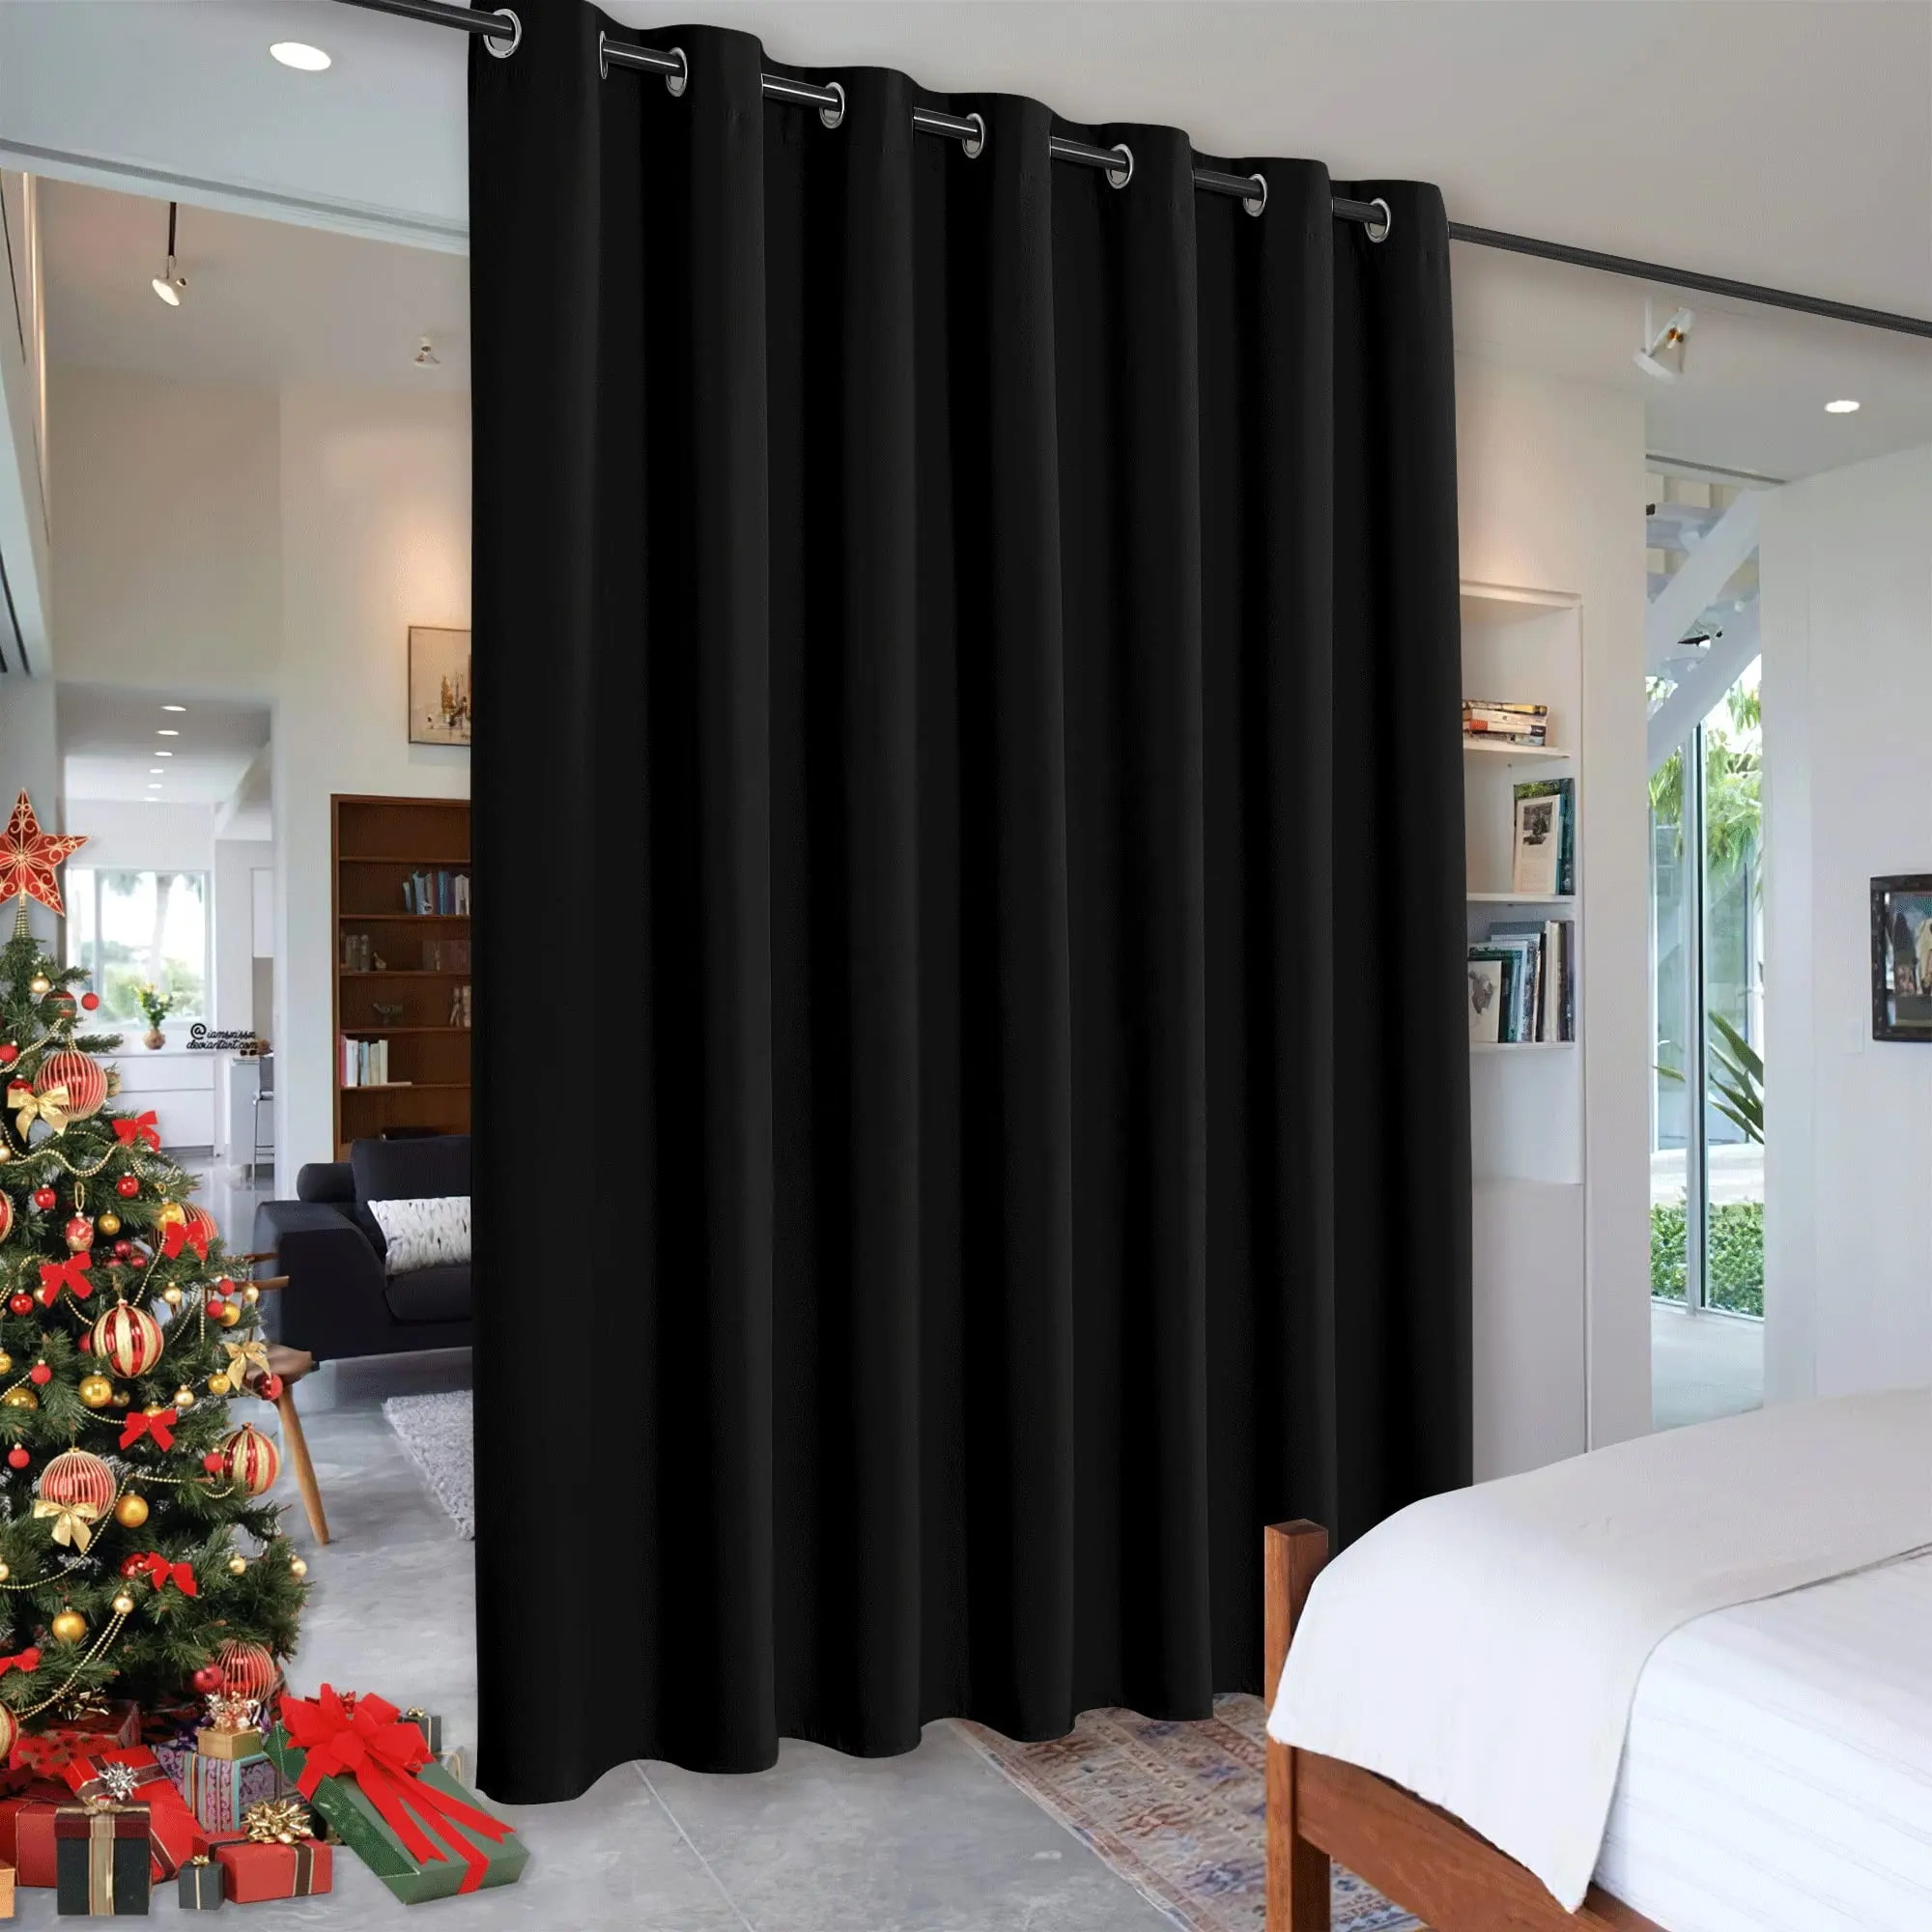 Blackout made 220x140 Anti Noise Thermal Insulated Curtains For Nursery Sliding Glass Door Storage Space Room Divider Bedroom